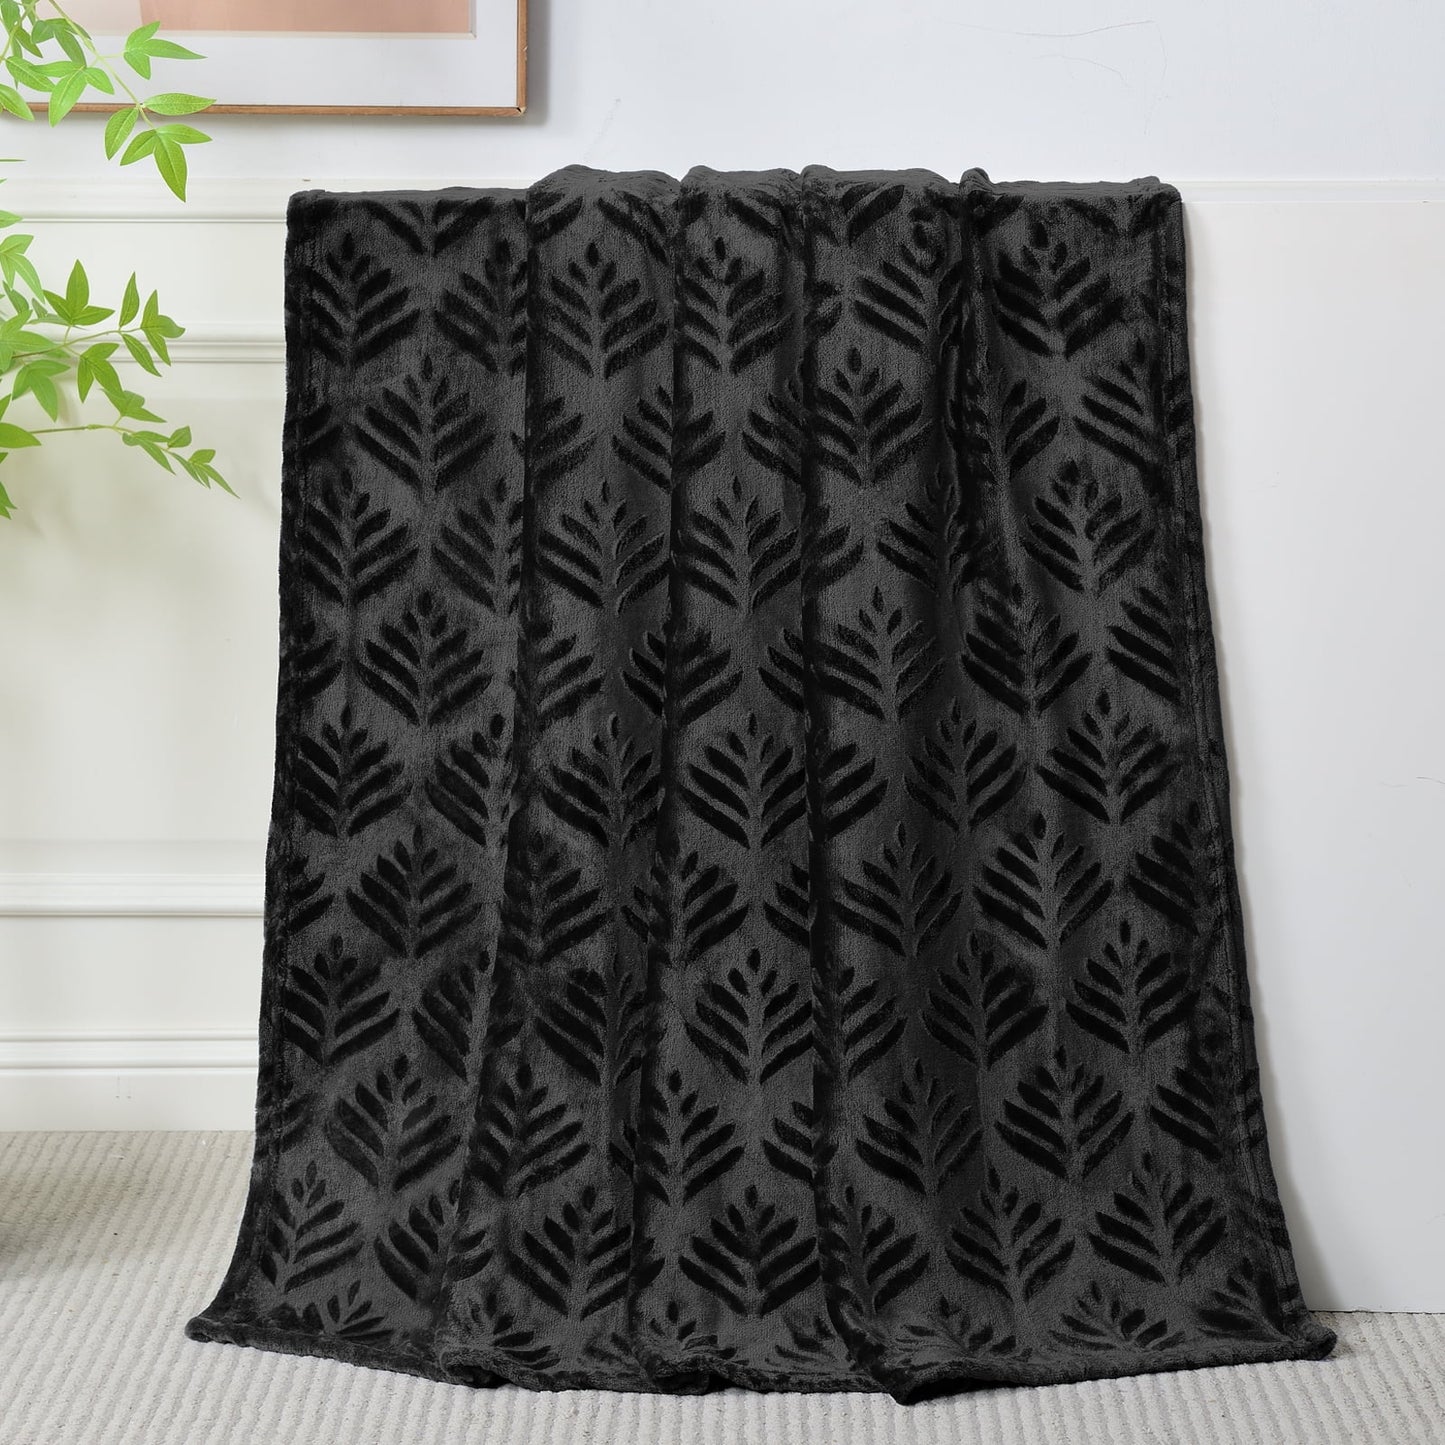 Exclusivo Mezcla Fleece Throw Blanket for Couch, Super Soft and Warm Blankets for All Seasons, Plush Fuzzy and Lightweight Black throw, 50x60 Inch